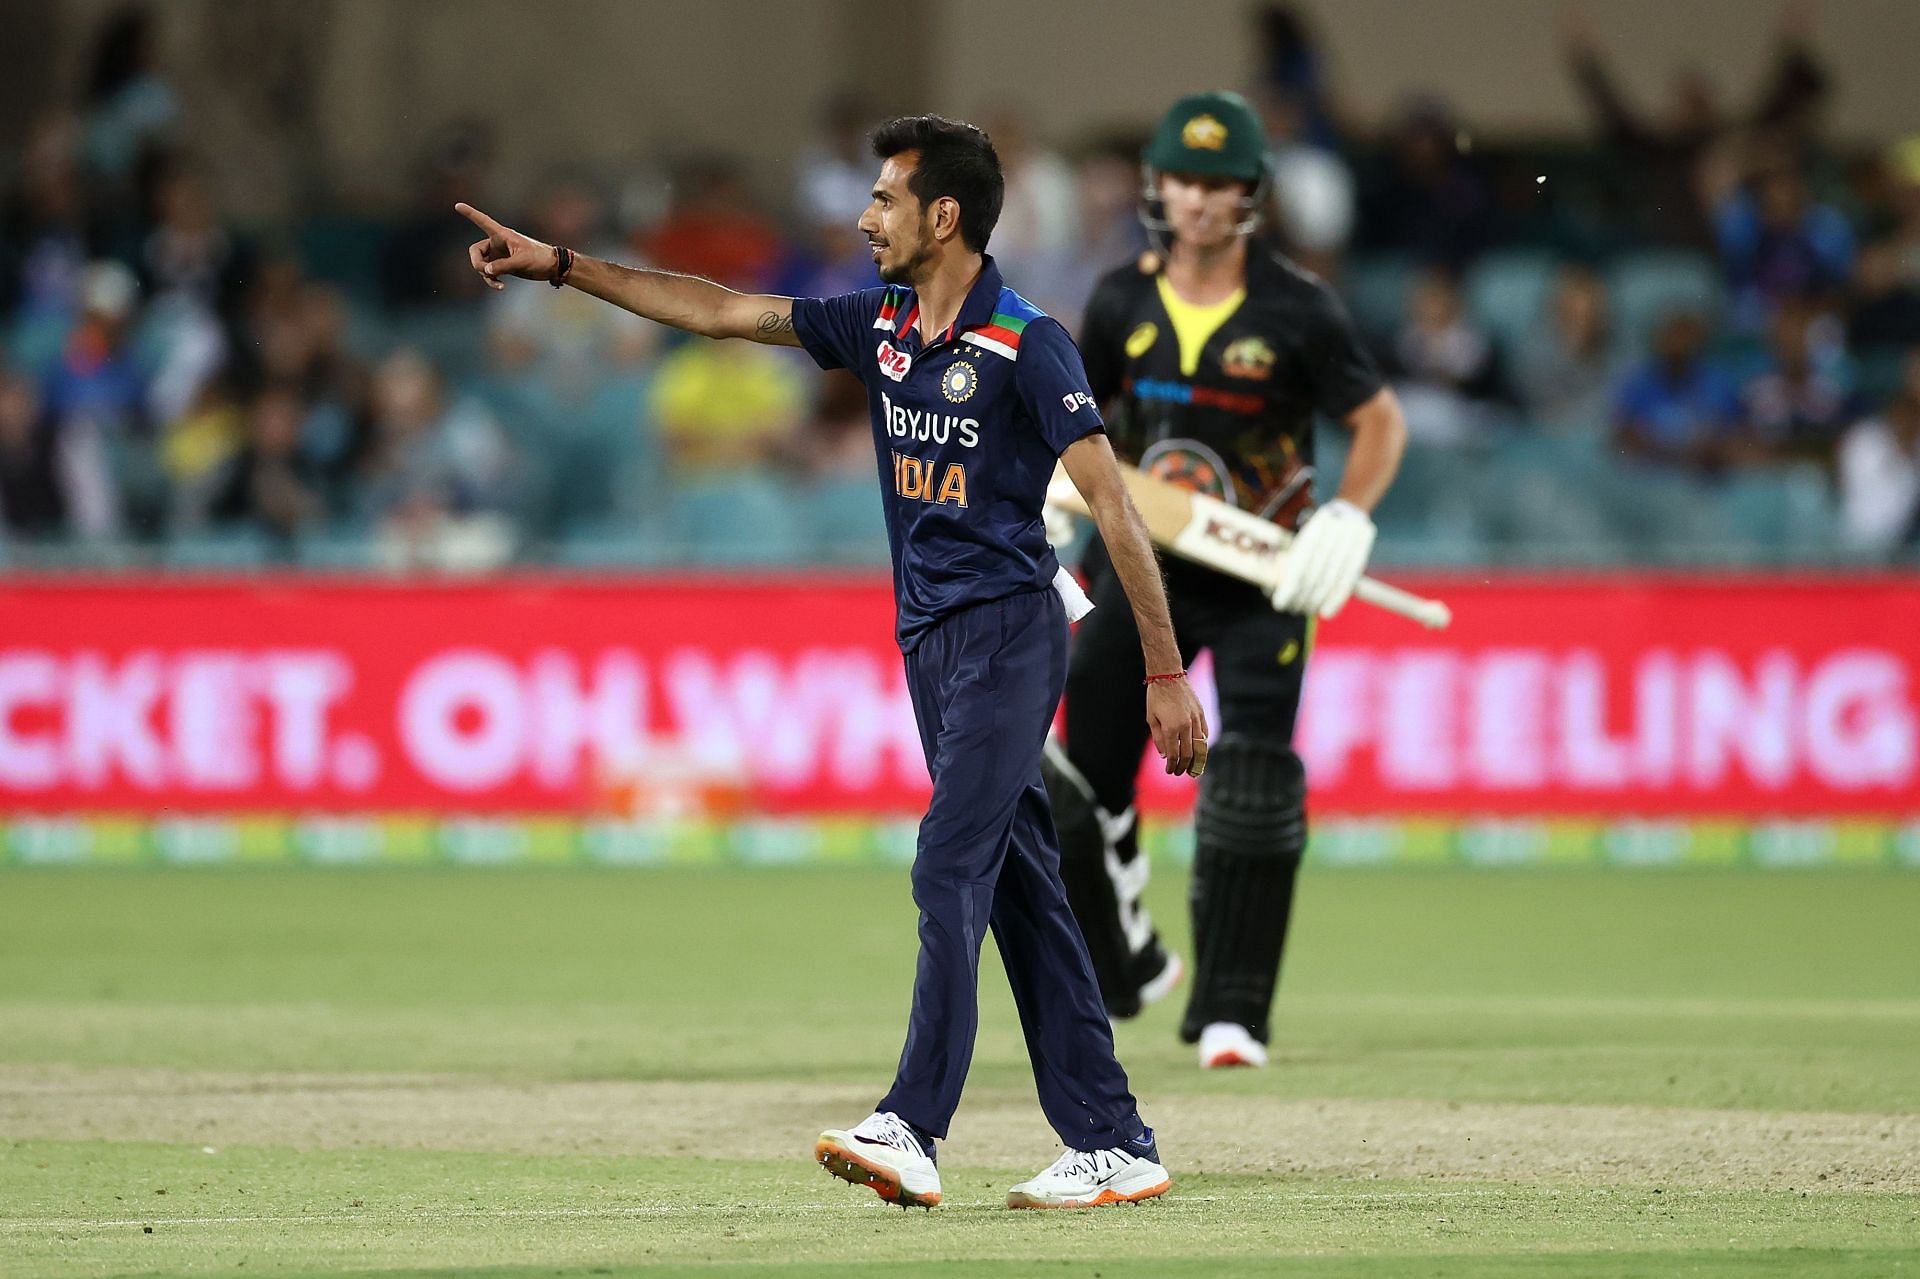 Indian team leg Yuzvendra Chahal celebrates after taking the wicket from Aaron Finch in the 2020 Canberra T20I. Image: Getty Images